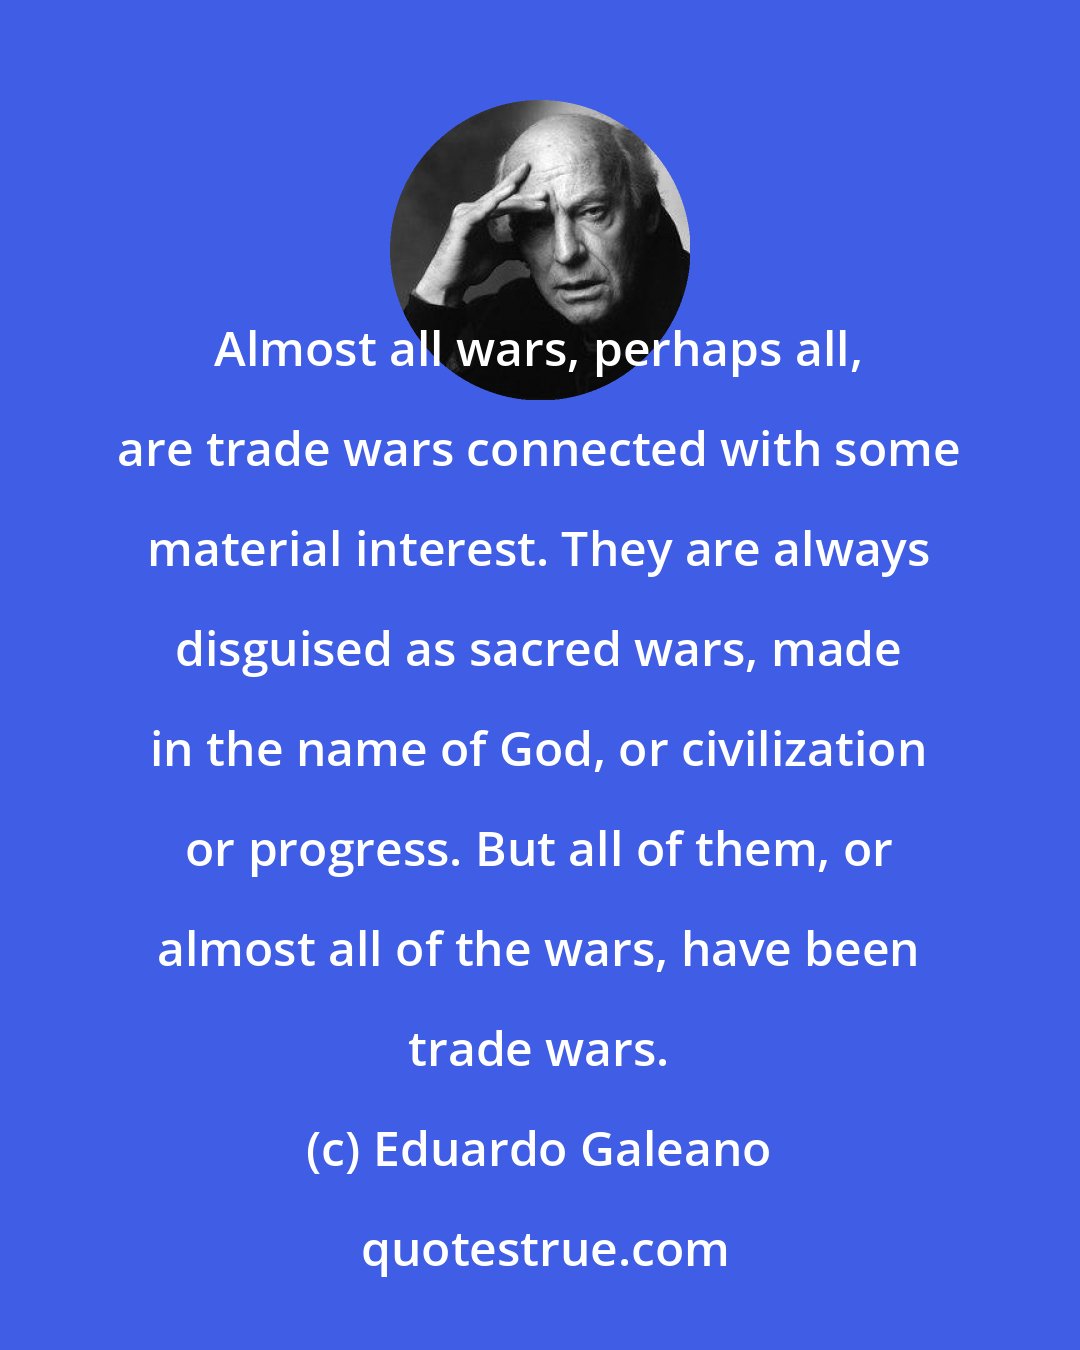 Eduardo Galeano: Almost all wars, perhaps all, are trade wars connected with some material interest. They are always disguised as sacred wars, made in the name of God, or civilization or progress. But all of them, or almost all of the wars, have been trade wars.